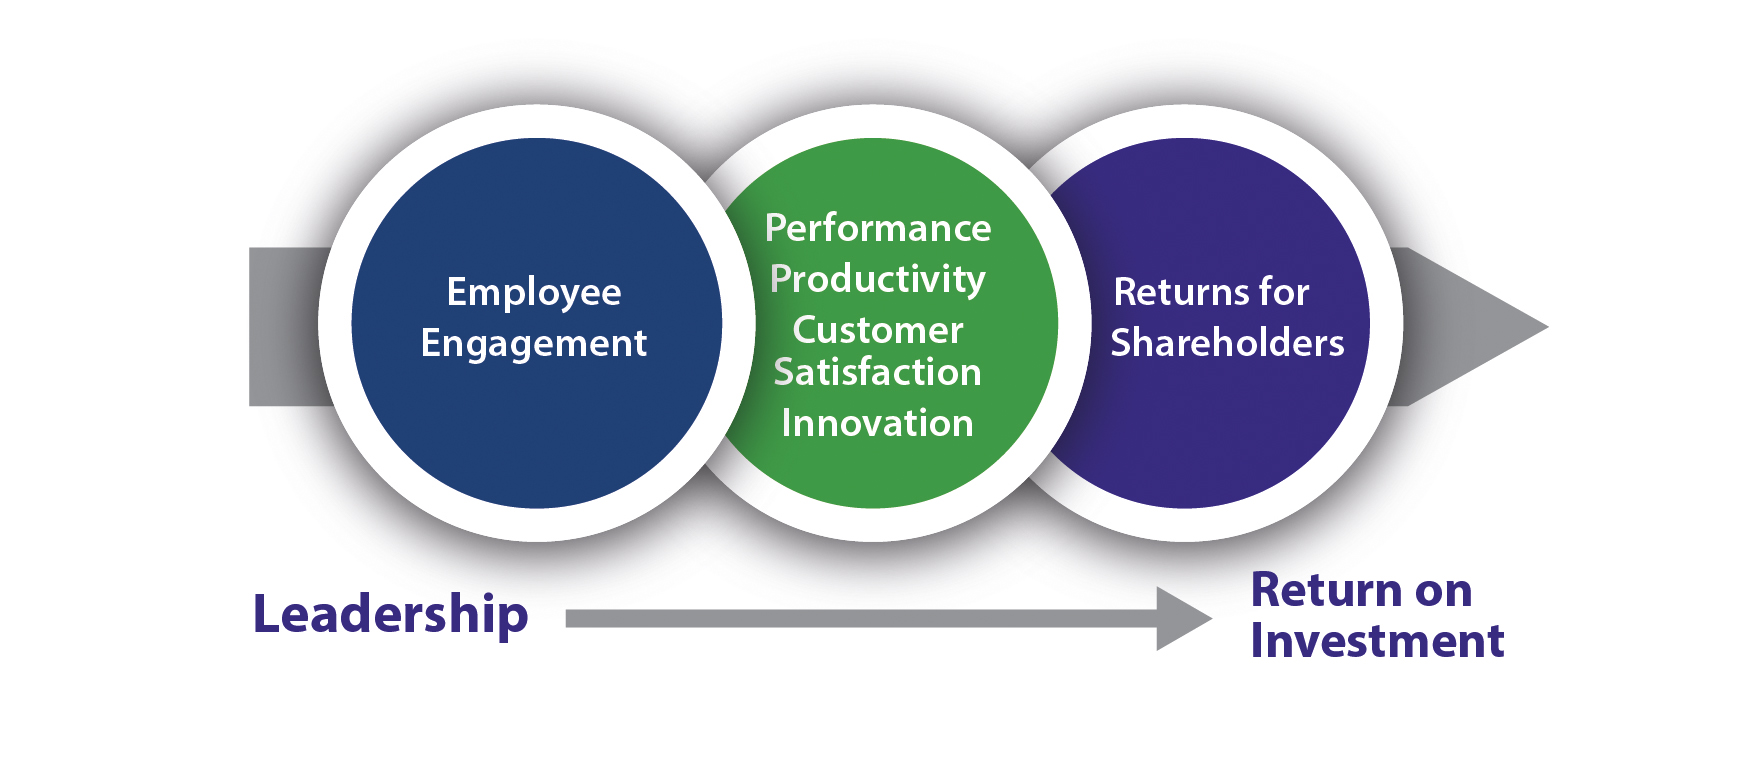 Leadership arrow to Return on Investment. Circle 1 - Employee Engagement. Circle 2 - Performance productivity. Circle 3 - Customer satisfaction. Innovation. Returns for shareholders